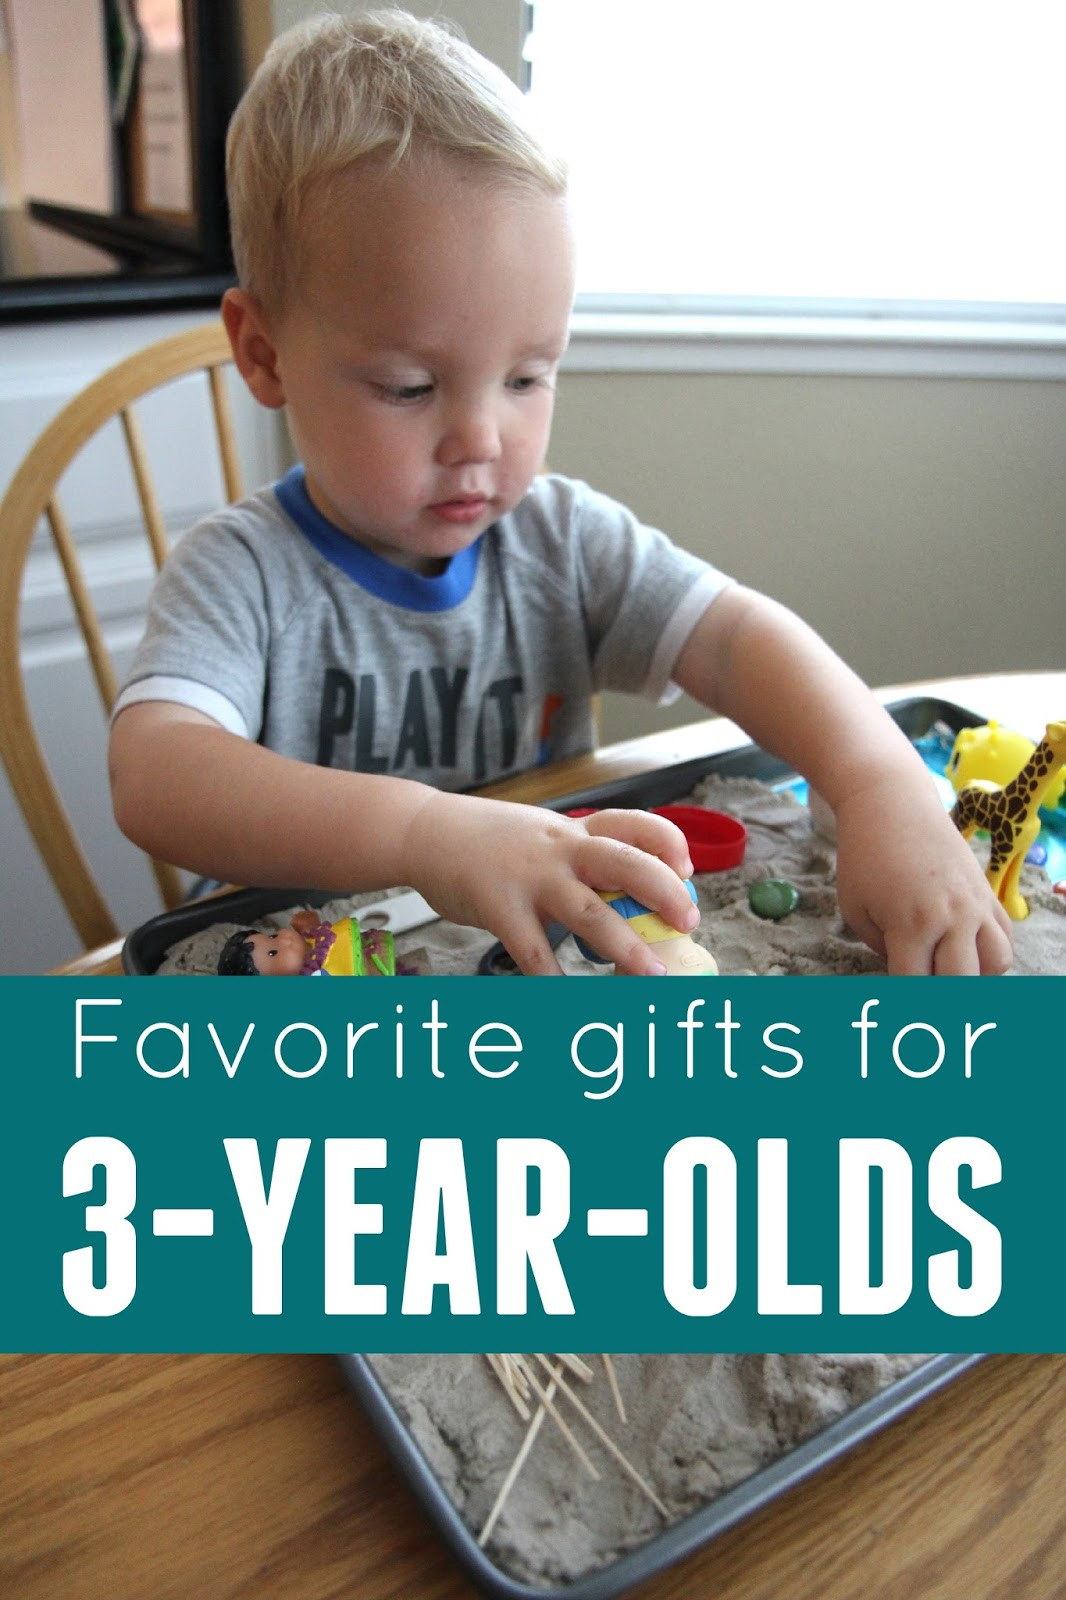 3 Year Old Gift Ideas Boys
 Toddler Approved Favorite Gifts for 3 year olds